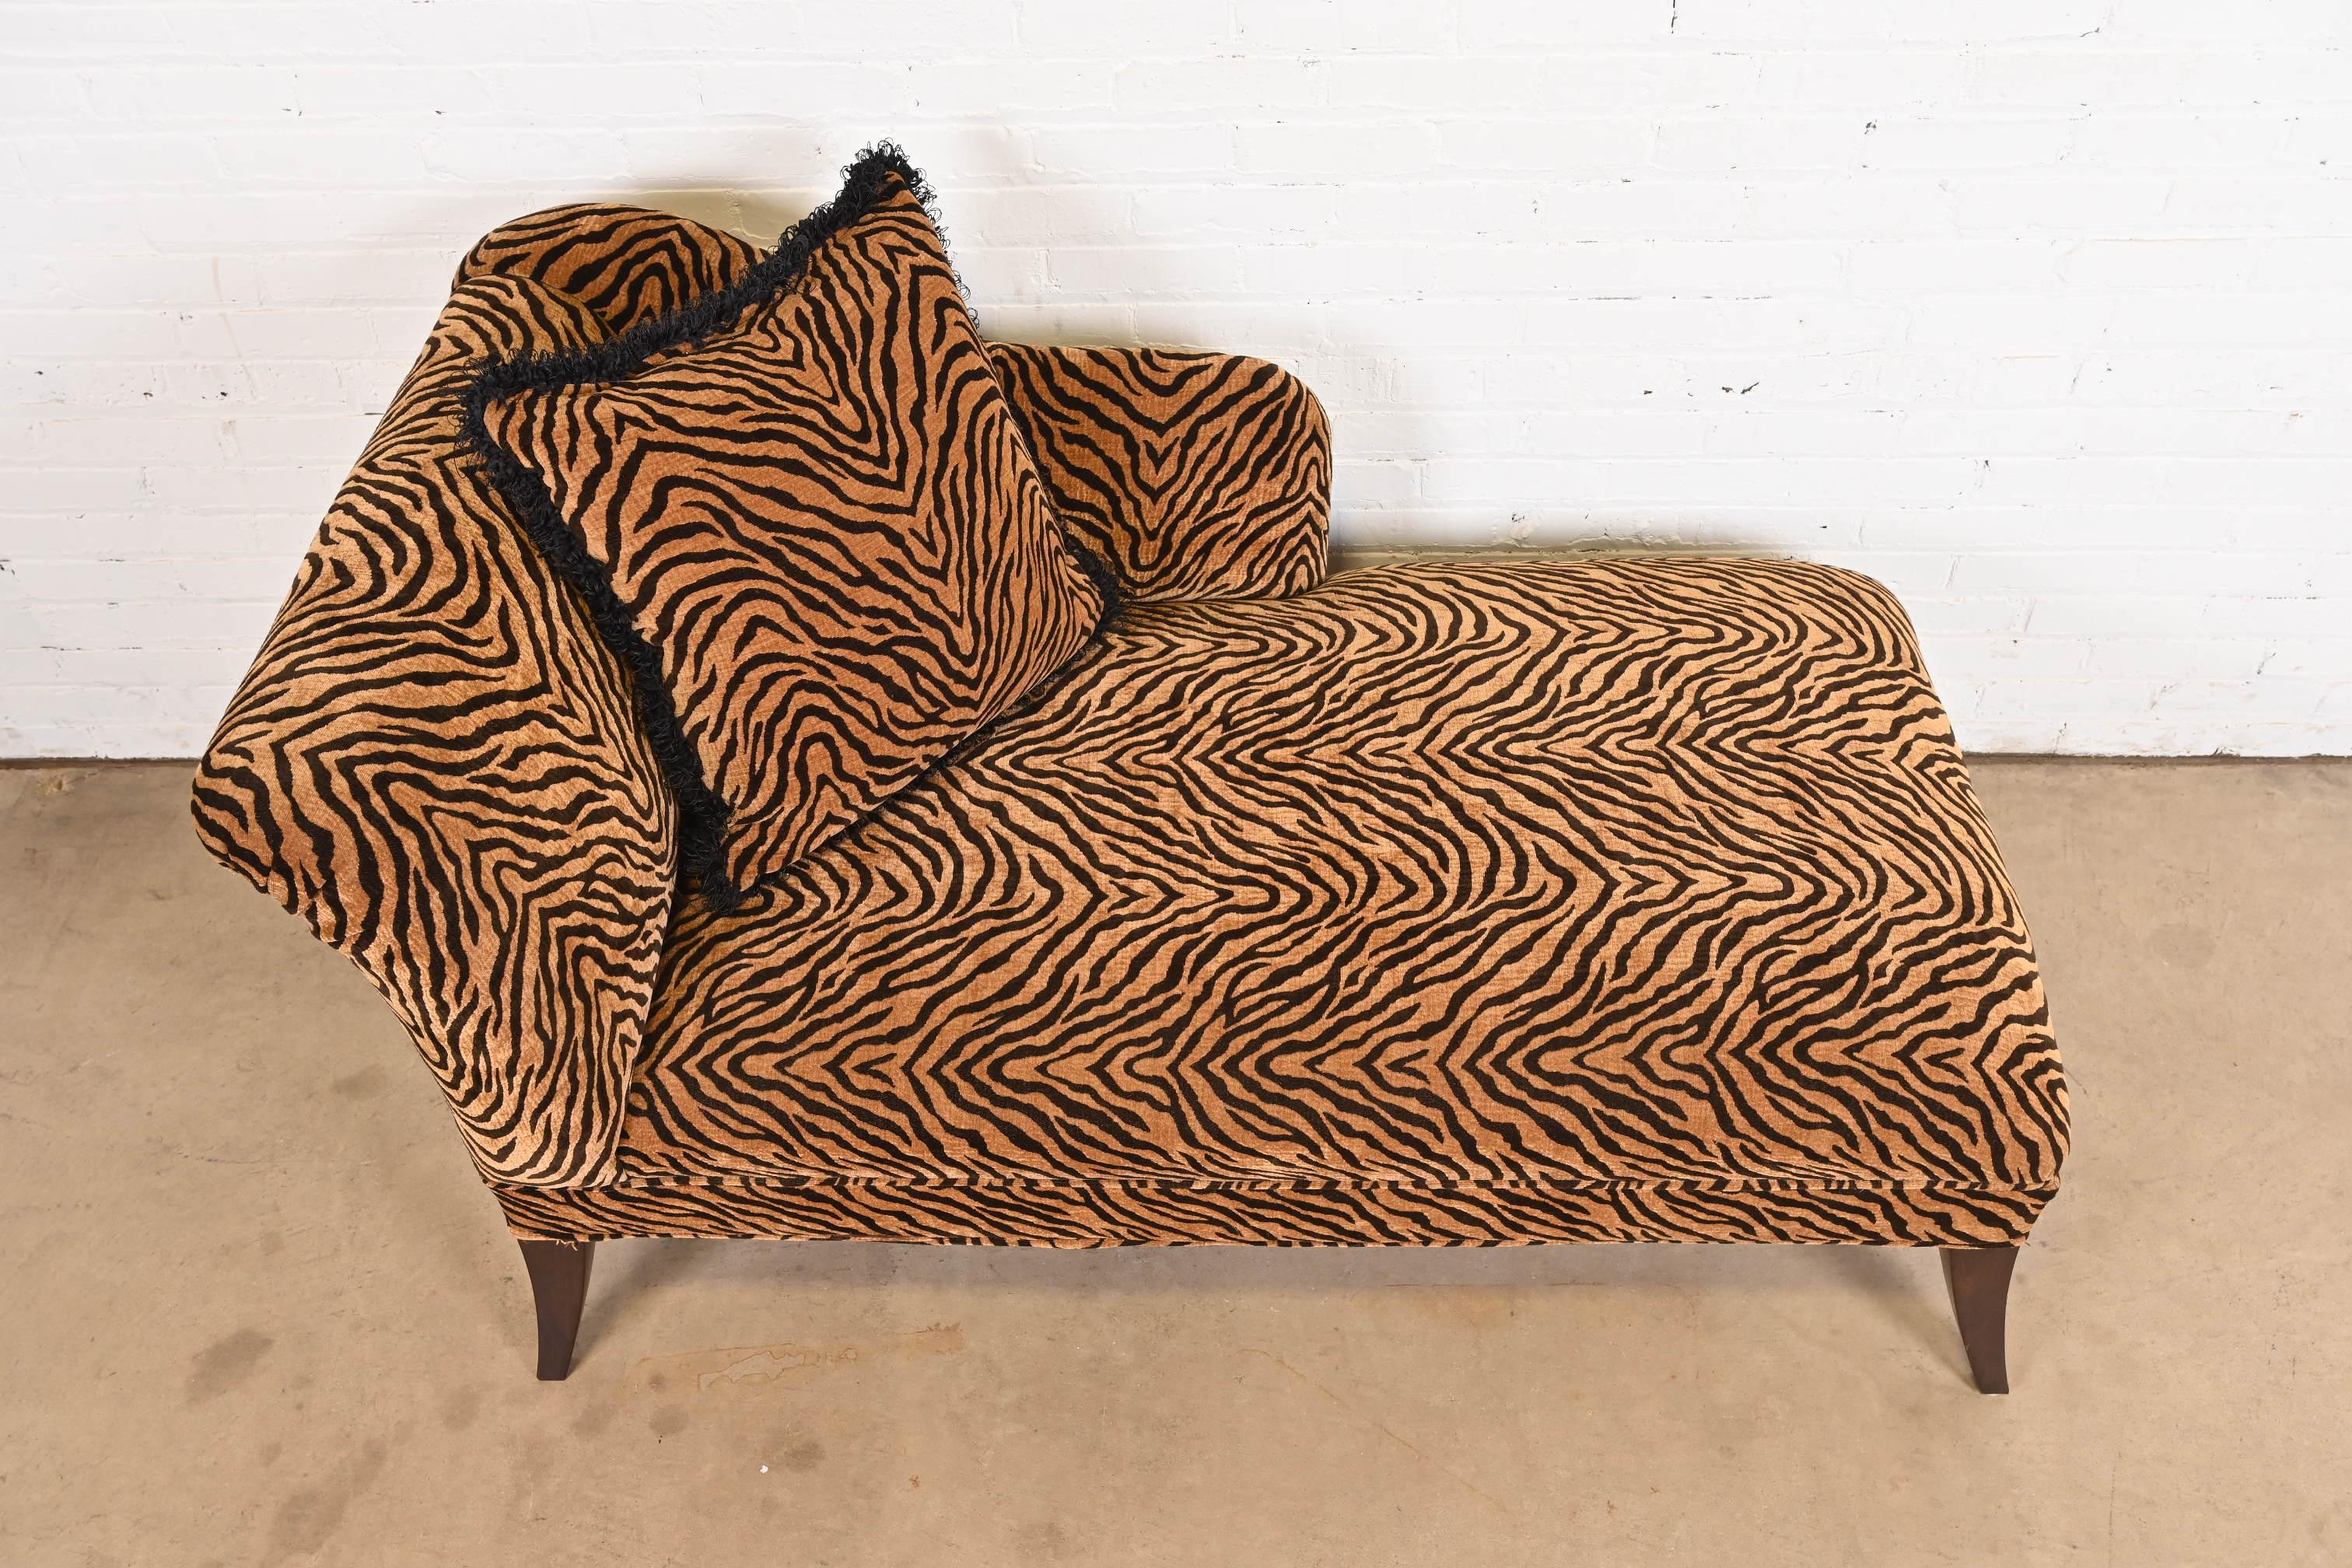 20th Century French Regency Tiger Print Upholstered Chaise Lounge For Sale